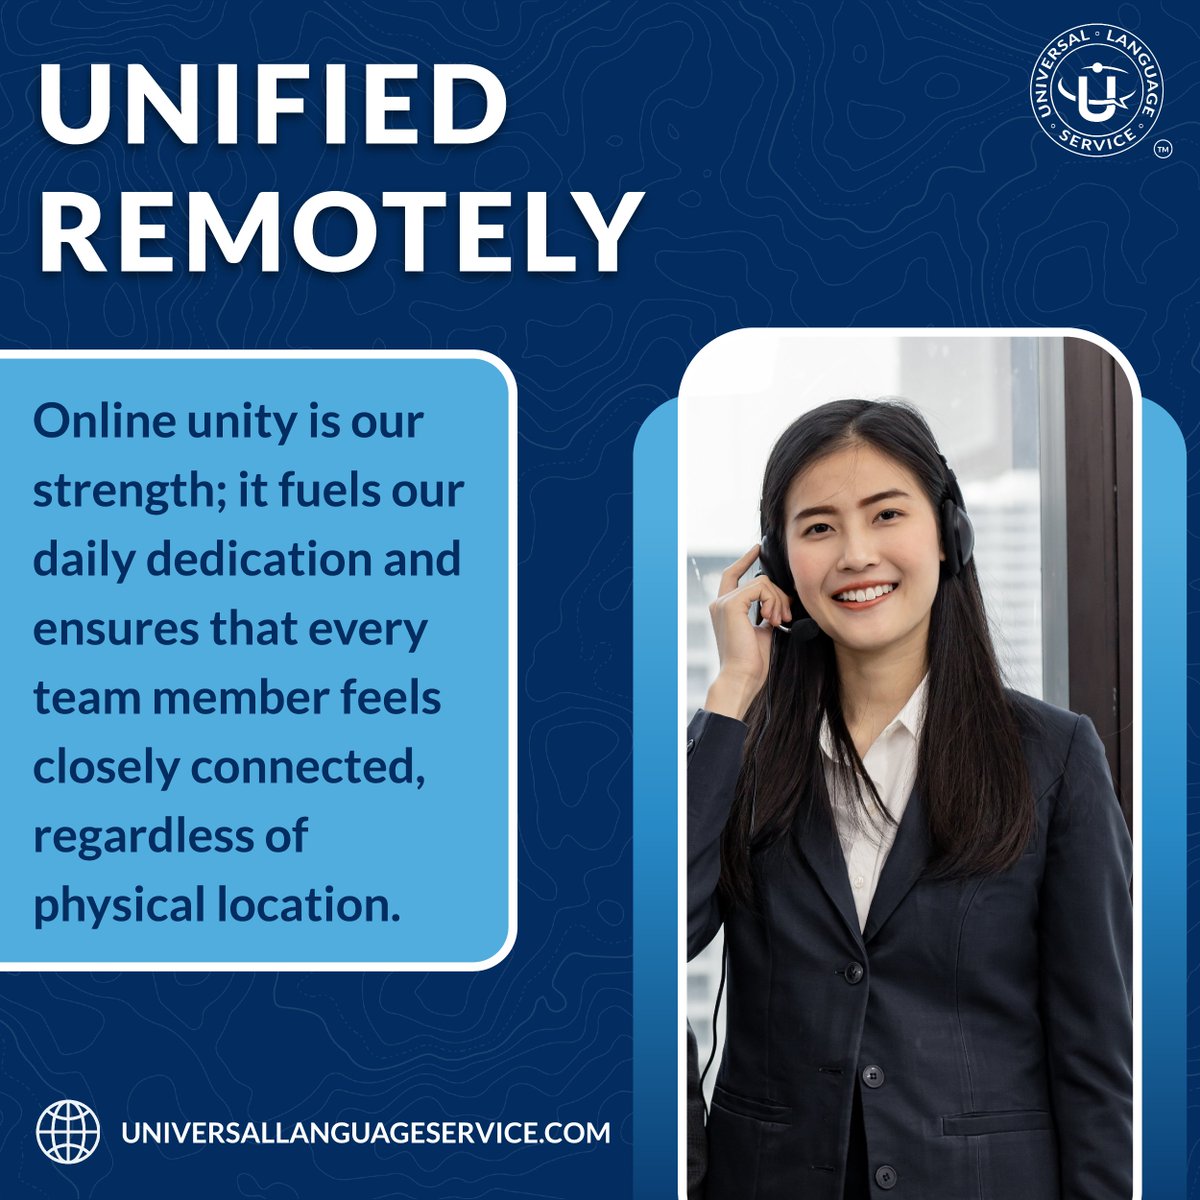 Distance doesn't diminish our dedication; it deepens our connection. Discover how our remote team stays united! 🔗 universallanguageservice.com #LanguageAccess #LanguageDiversity #Interpreting #Translation #RemoteWork #RemoteInterpreting